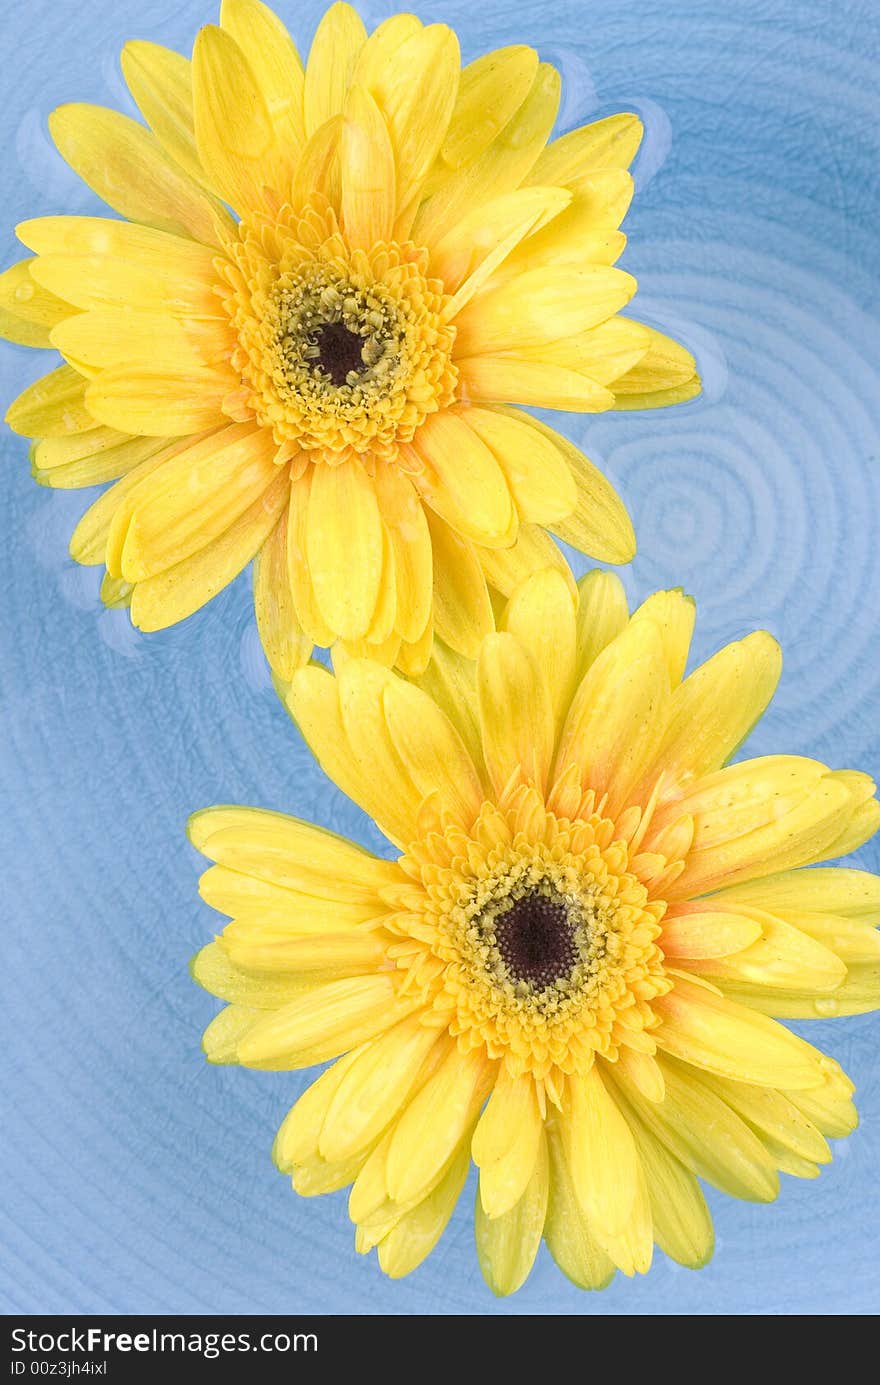 Yellow gerbera Daisies floating on the water.